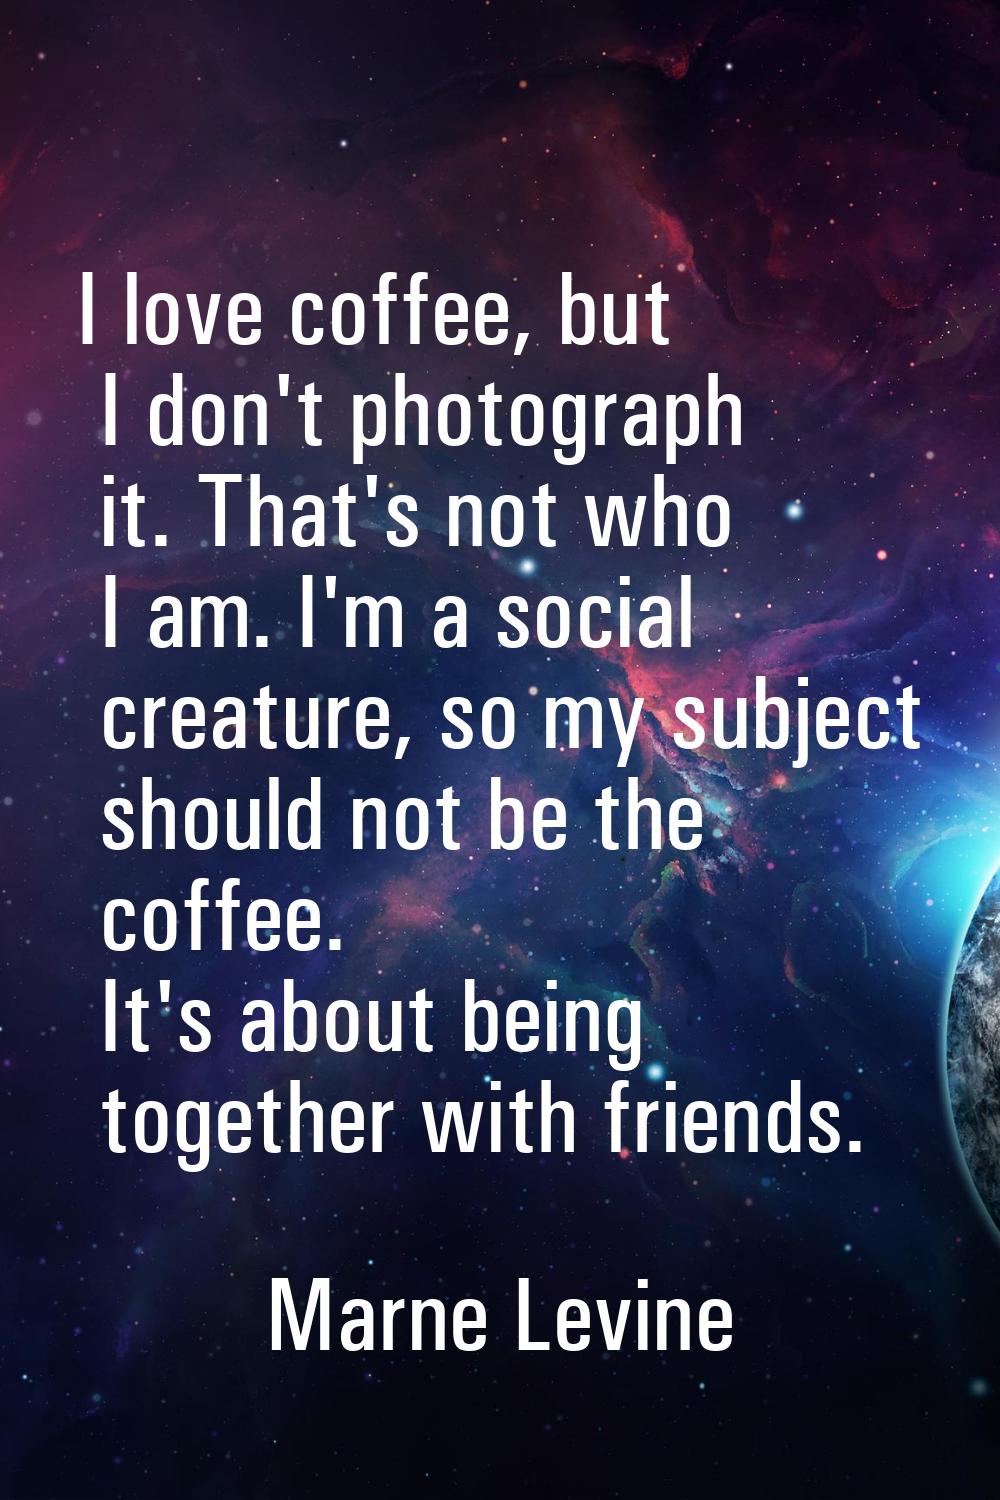 I love coffee, but I don't photograph it. That's not who I am. I'm a social creature, so my subject